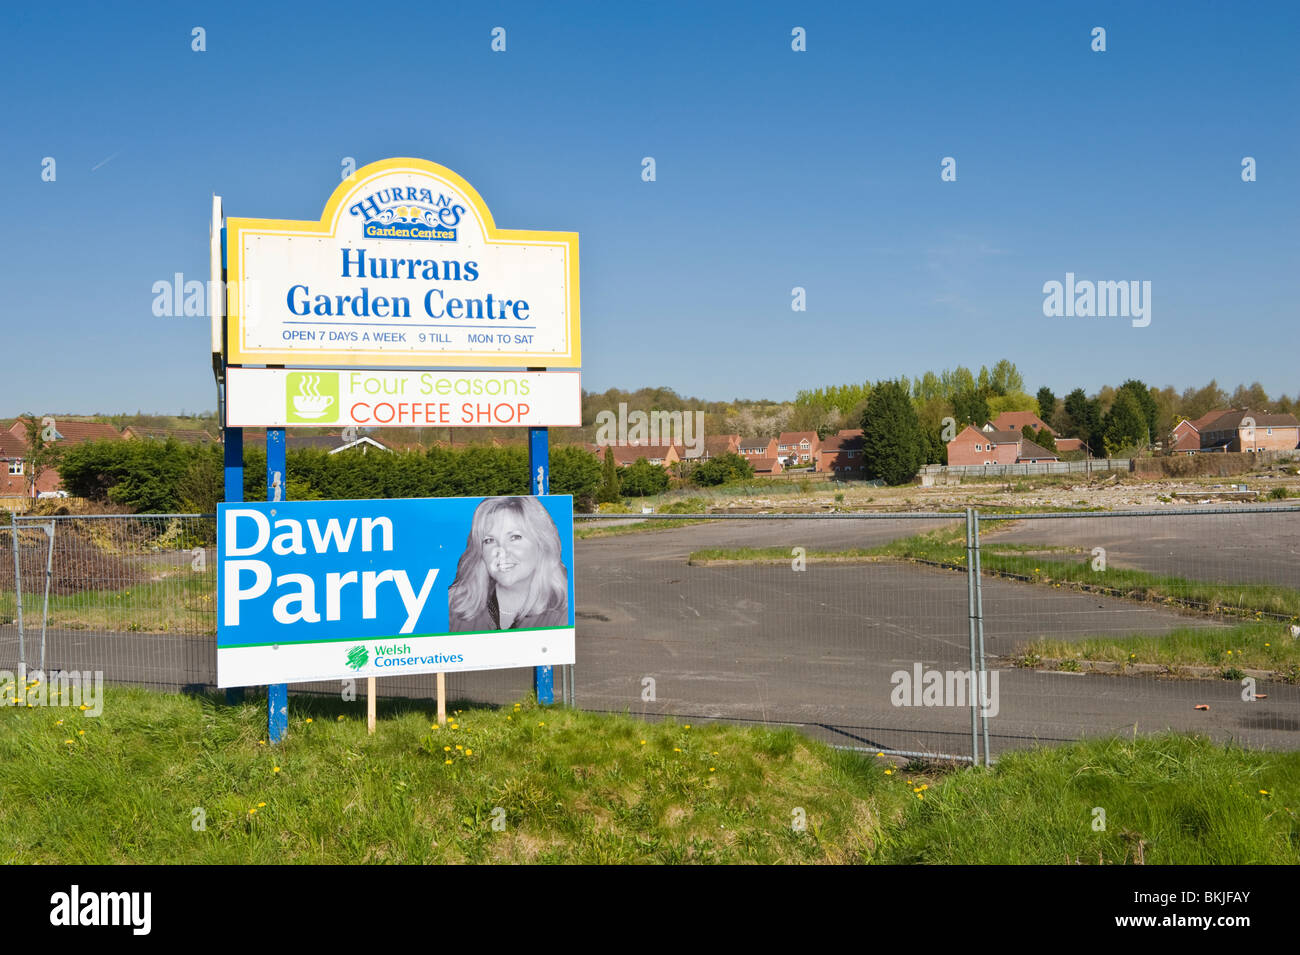 Dawn Parry Conservative Party candidate 2010 General Election poster in Newport East constituency South Wales UK Stock Photo